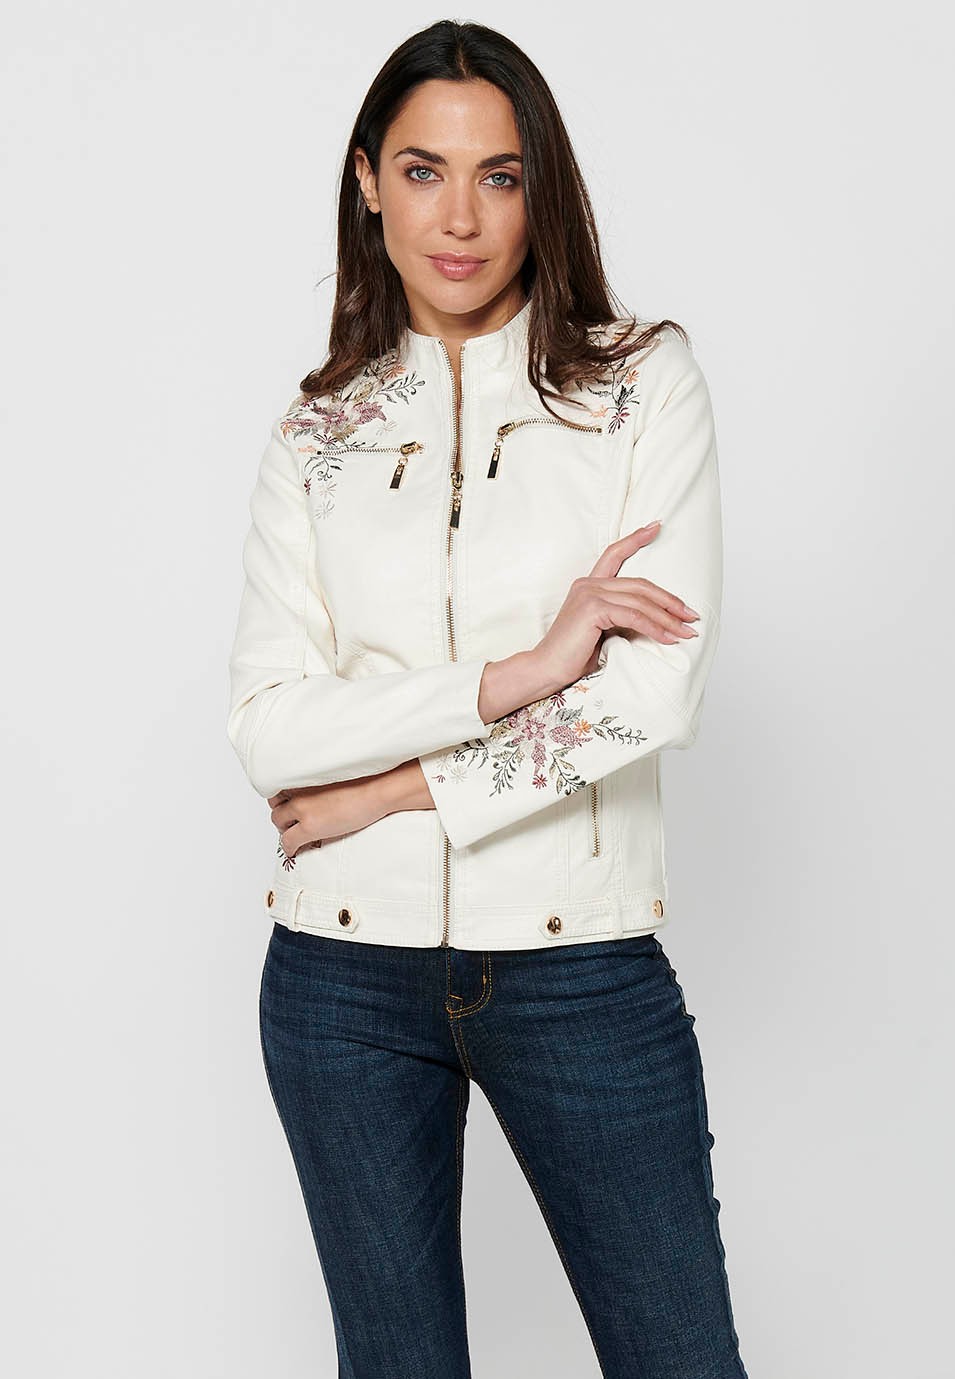 Leather-effect jacket with front zipper closure with floral embroidered details with round neck and front pockets in ecru color for women